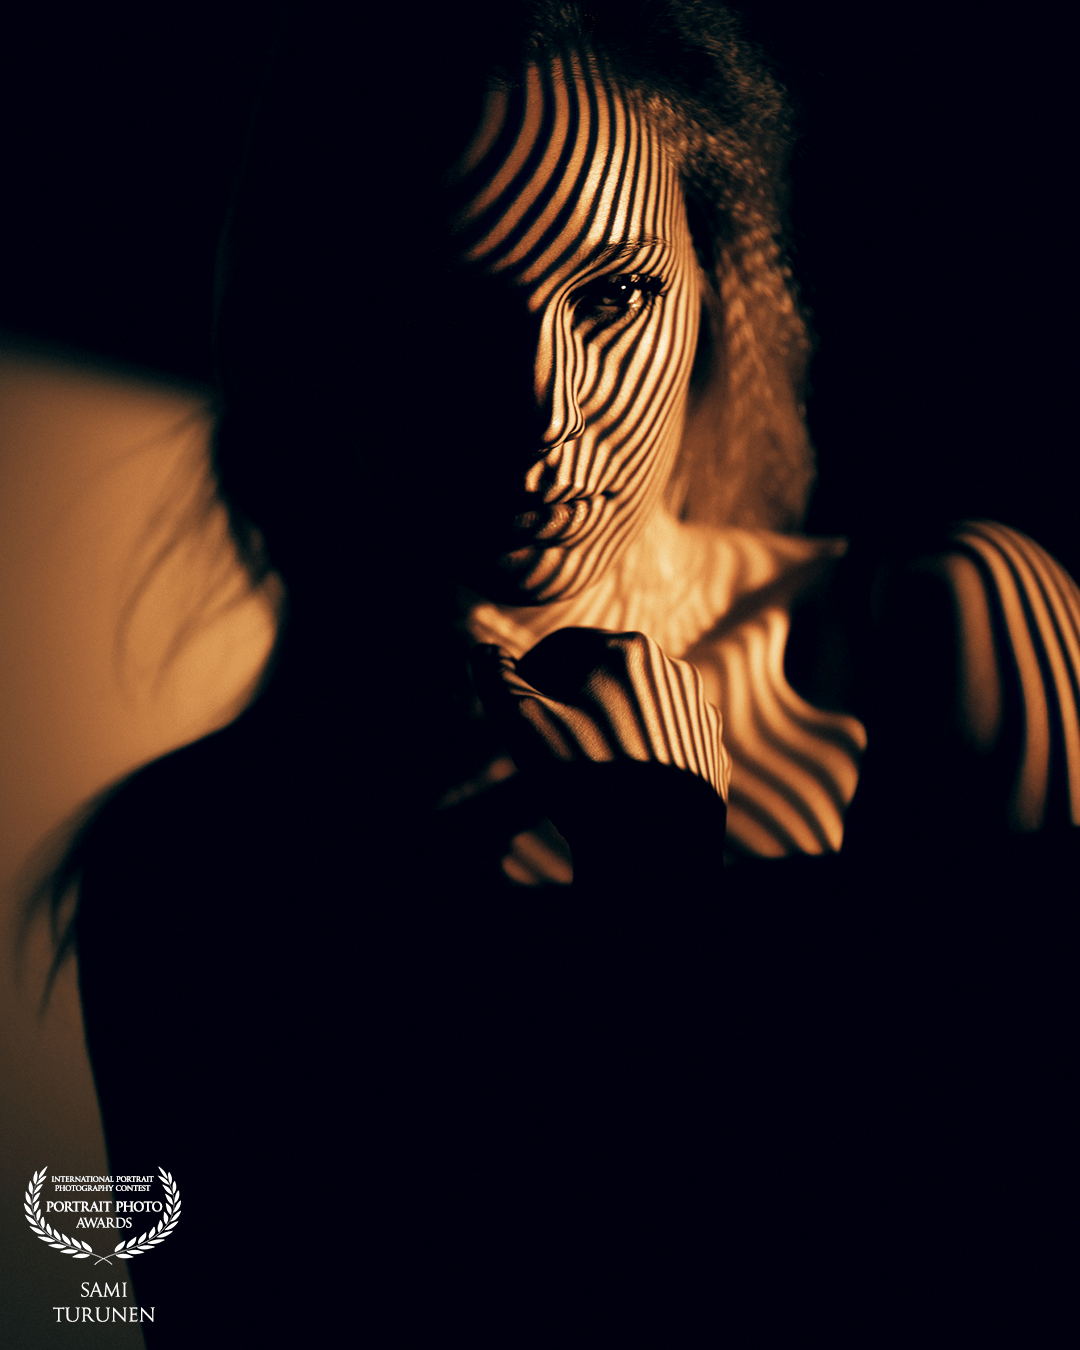 This photo is part of my creative lighting setup where I use projection to create gobo portrait. Stripe gobo gives nice shapes and flows through model's (awesome Emma Luukkanen) natural curves. In this frame I used black silhoutte against bright background to create a dimension. Definitely one of my favs in this set.